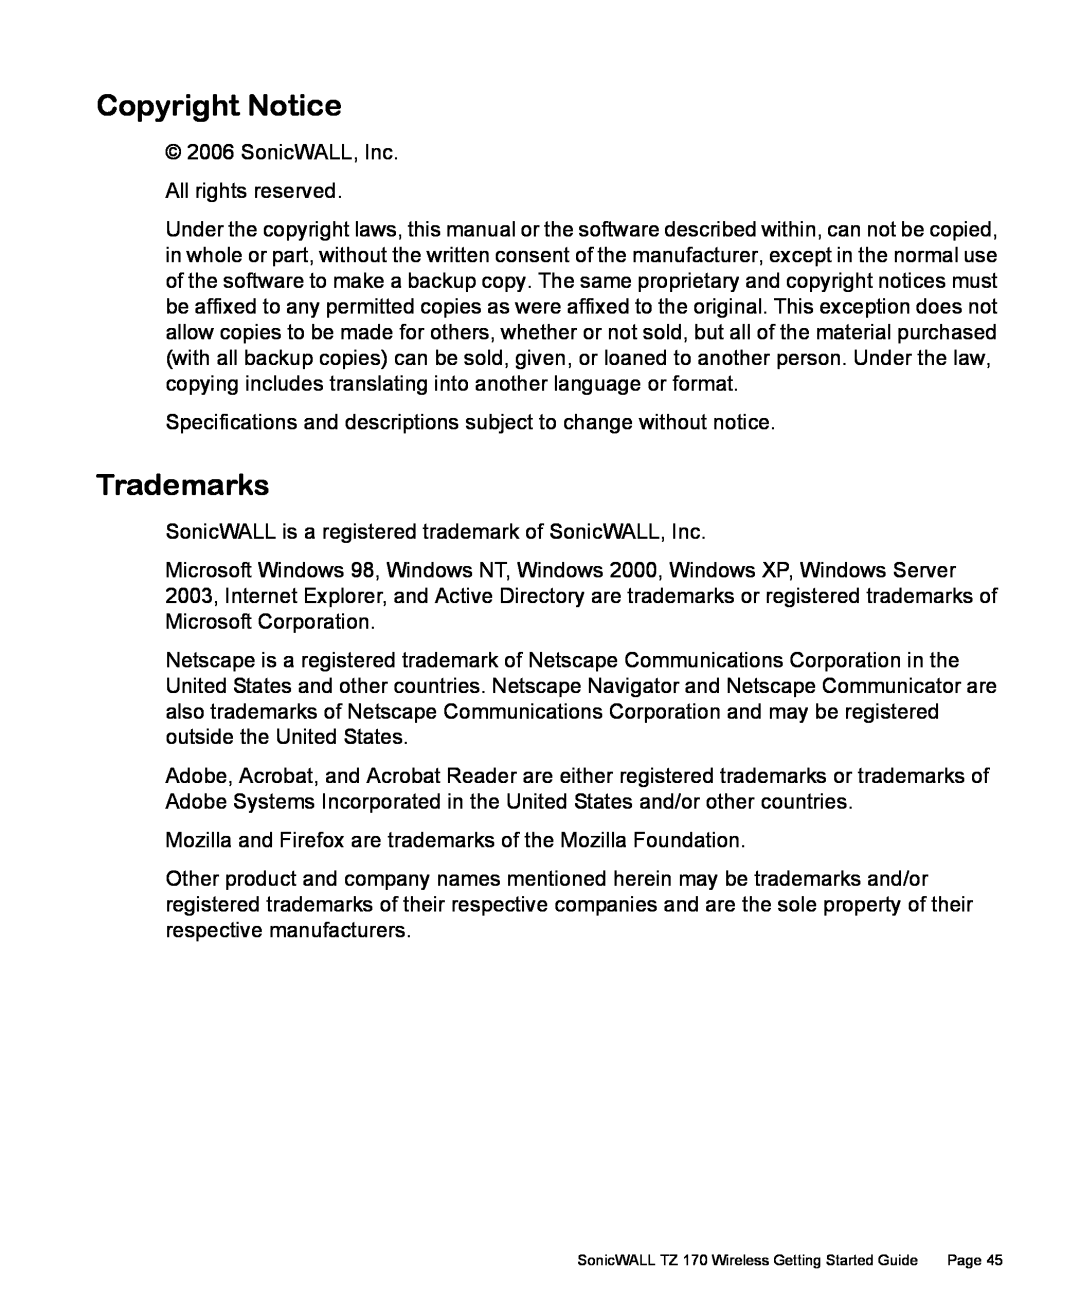 SonicWALL 170 manual Copyright Notice, Trademarks 